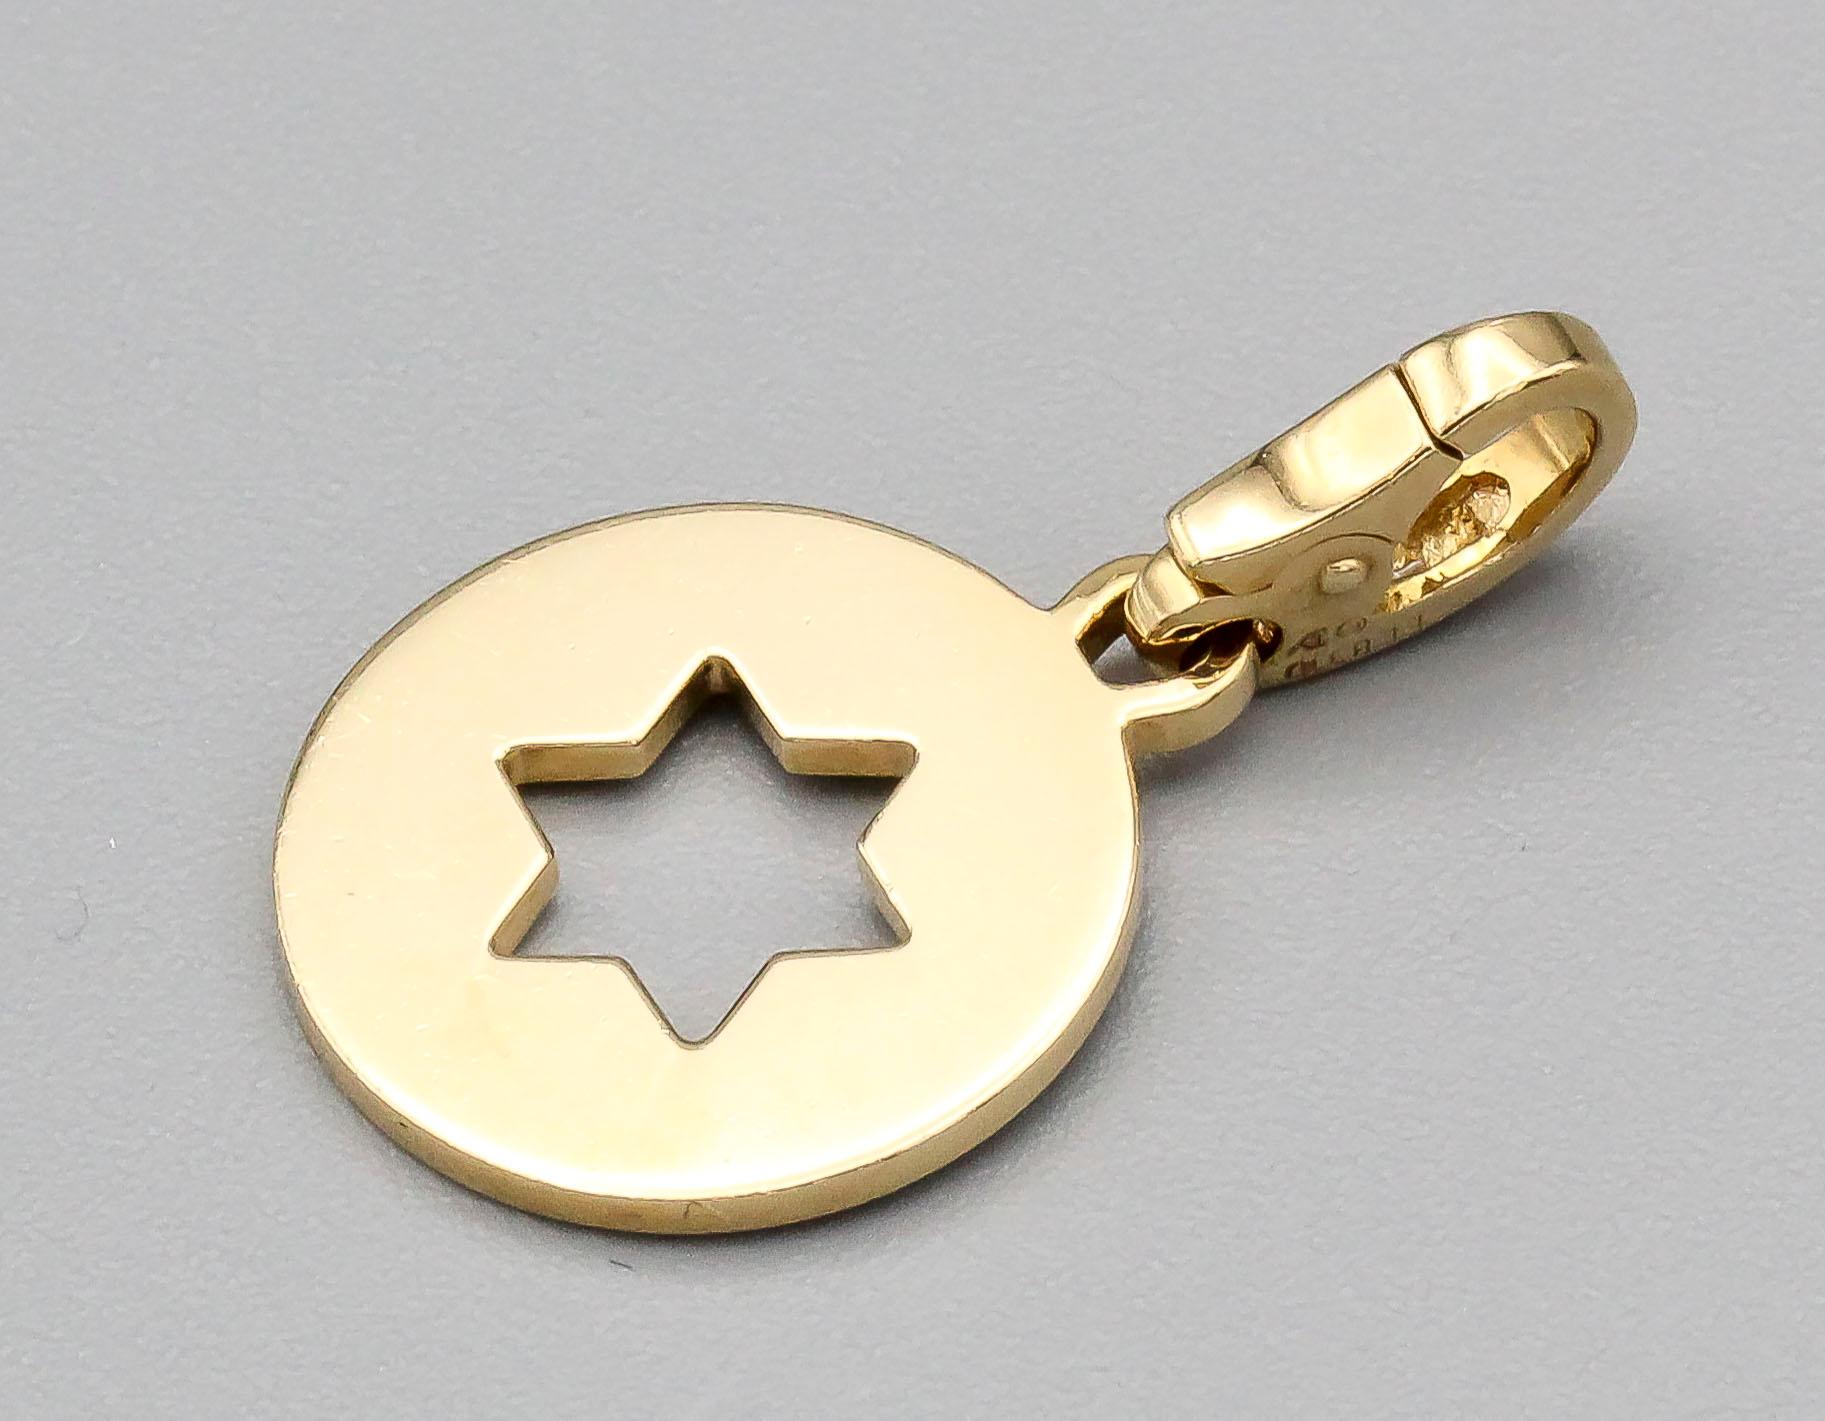 Fine 18k yellow gold Star of David charm by Cartier. 

Hallmarks: Cartier, 750, reference numbers.